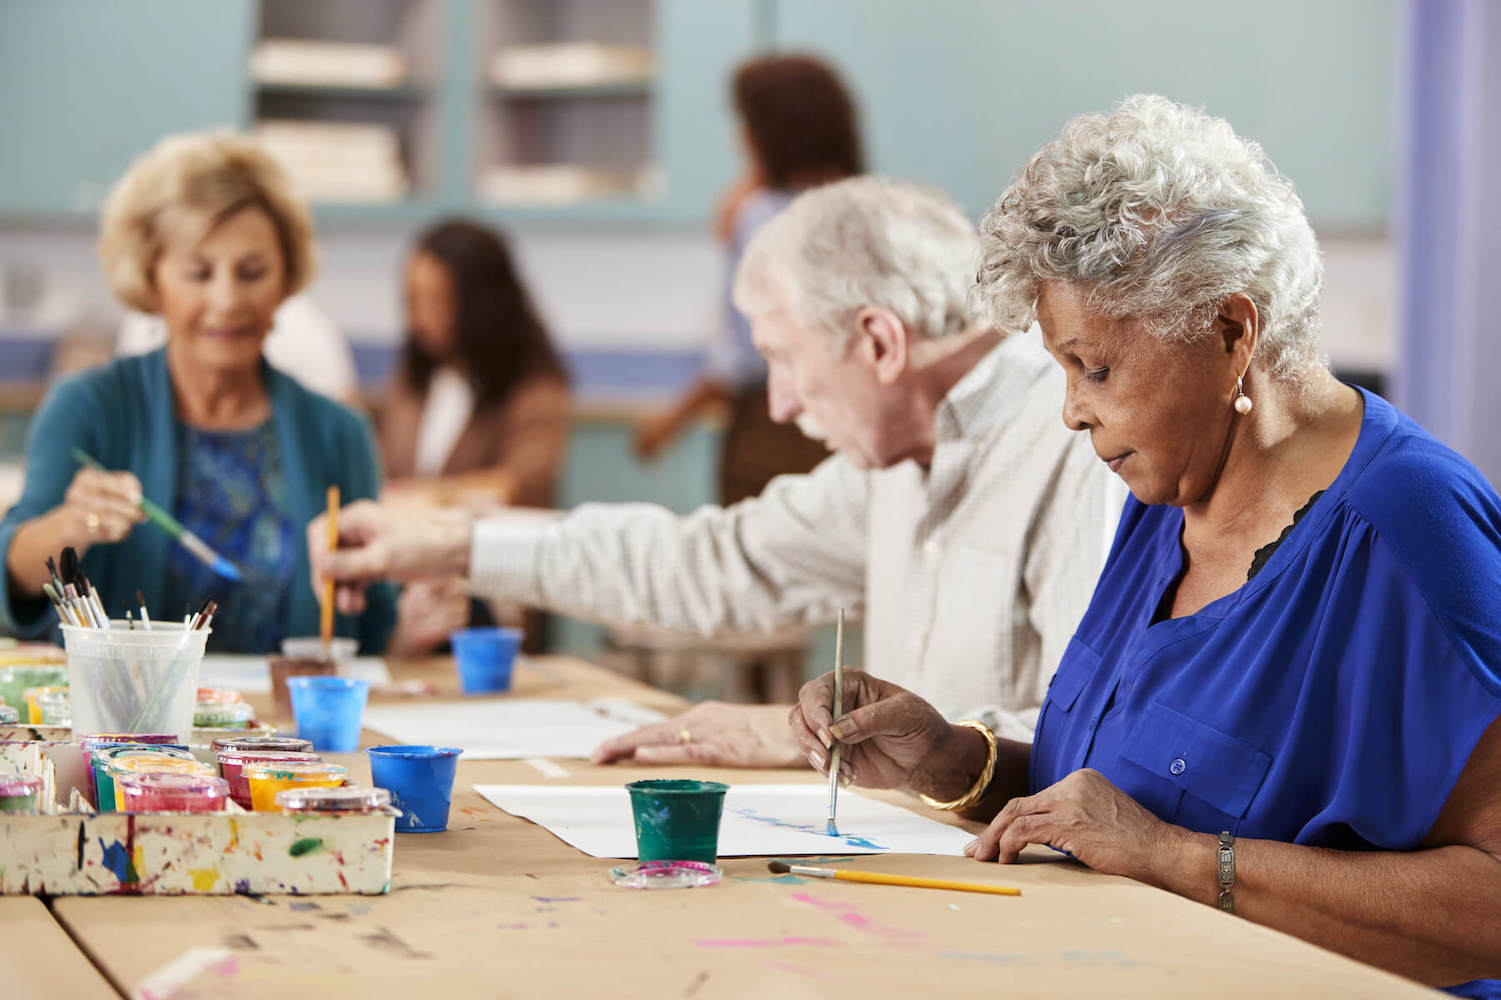 Assisted Living Facilities painting activity